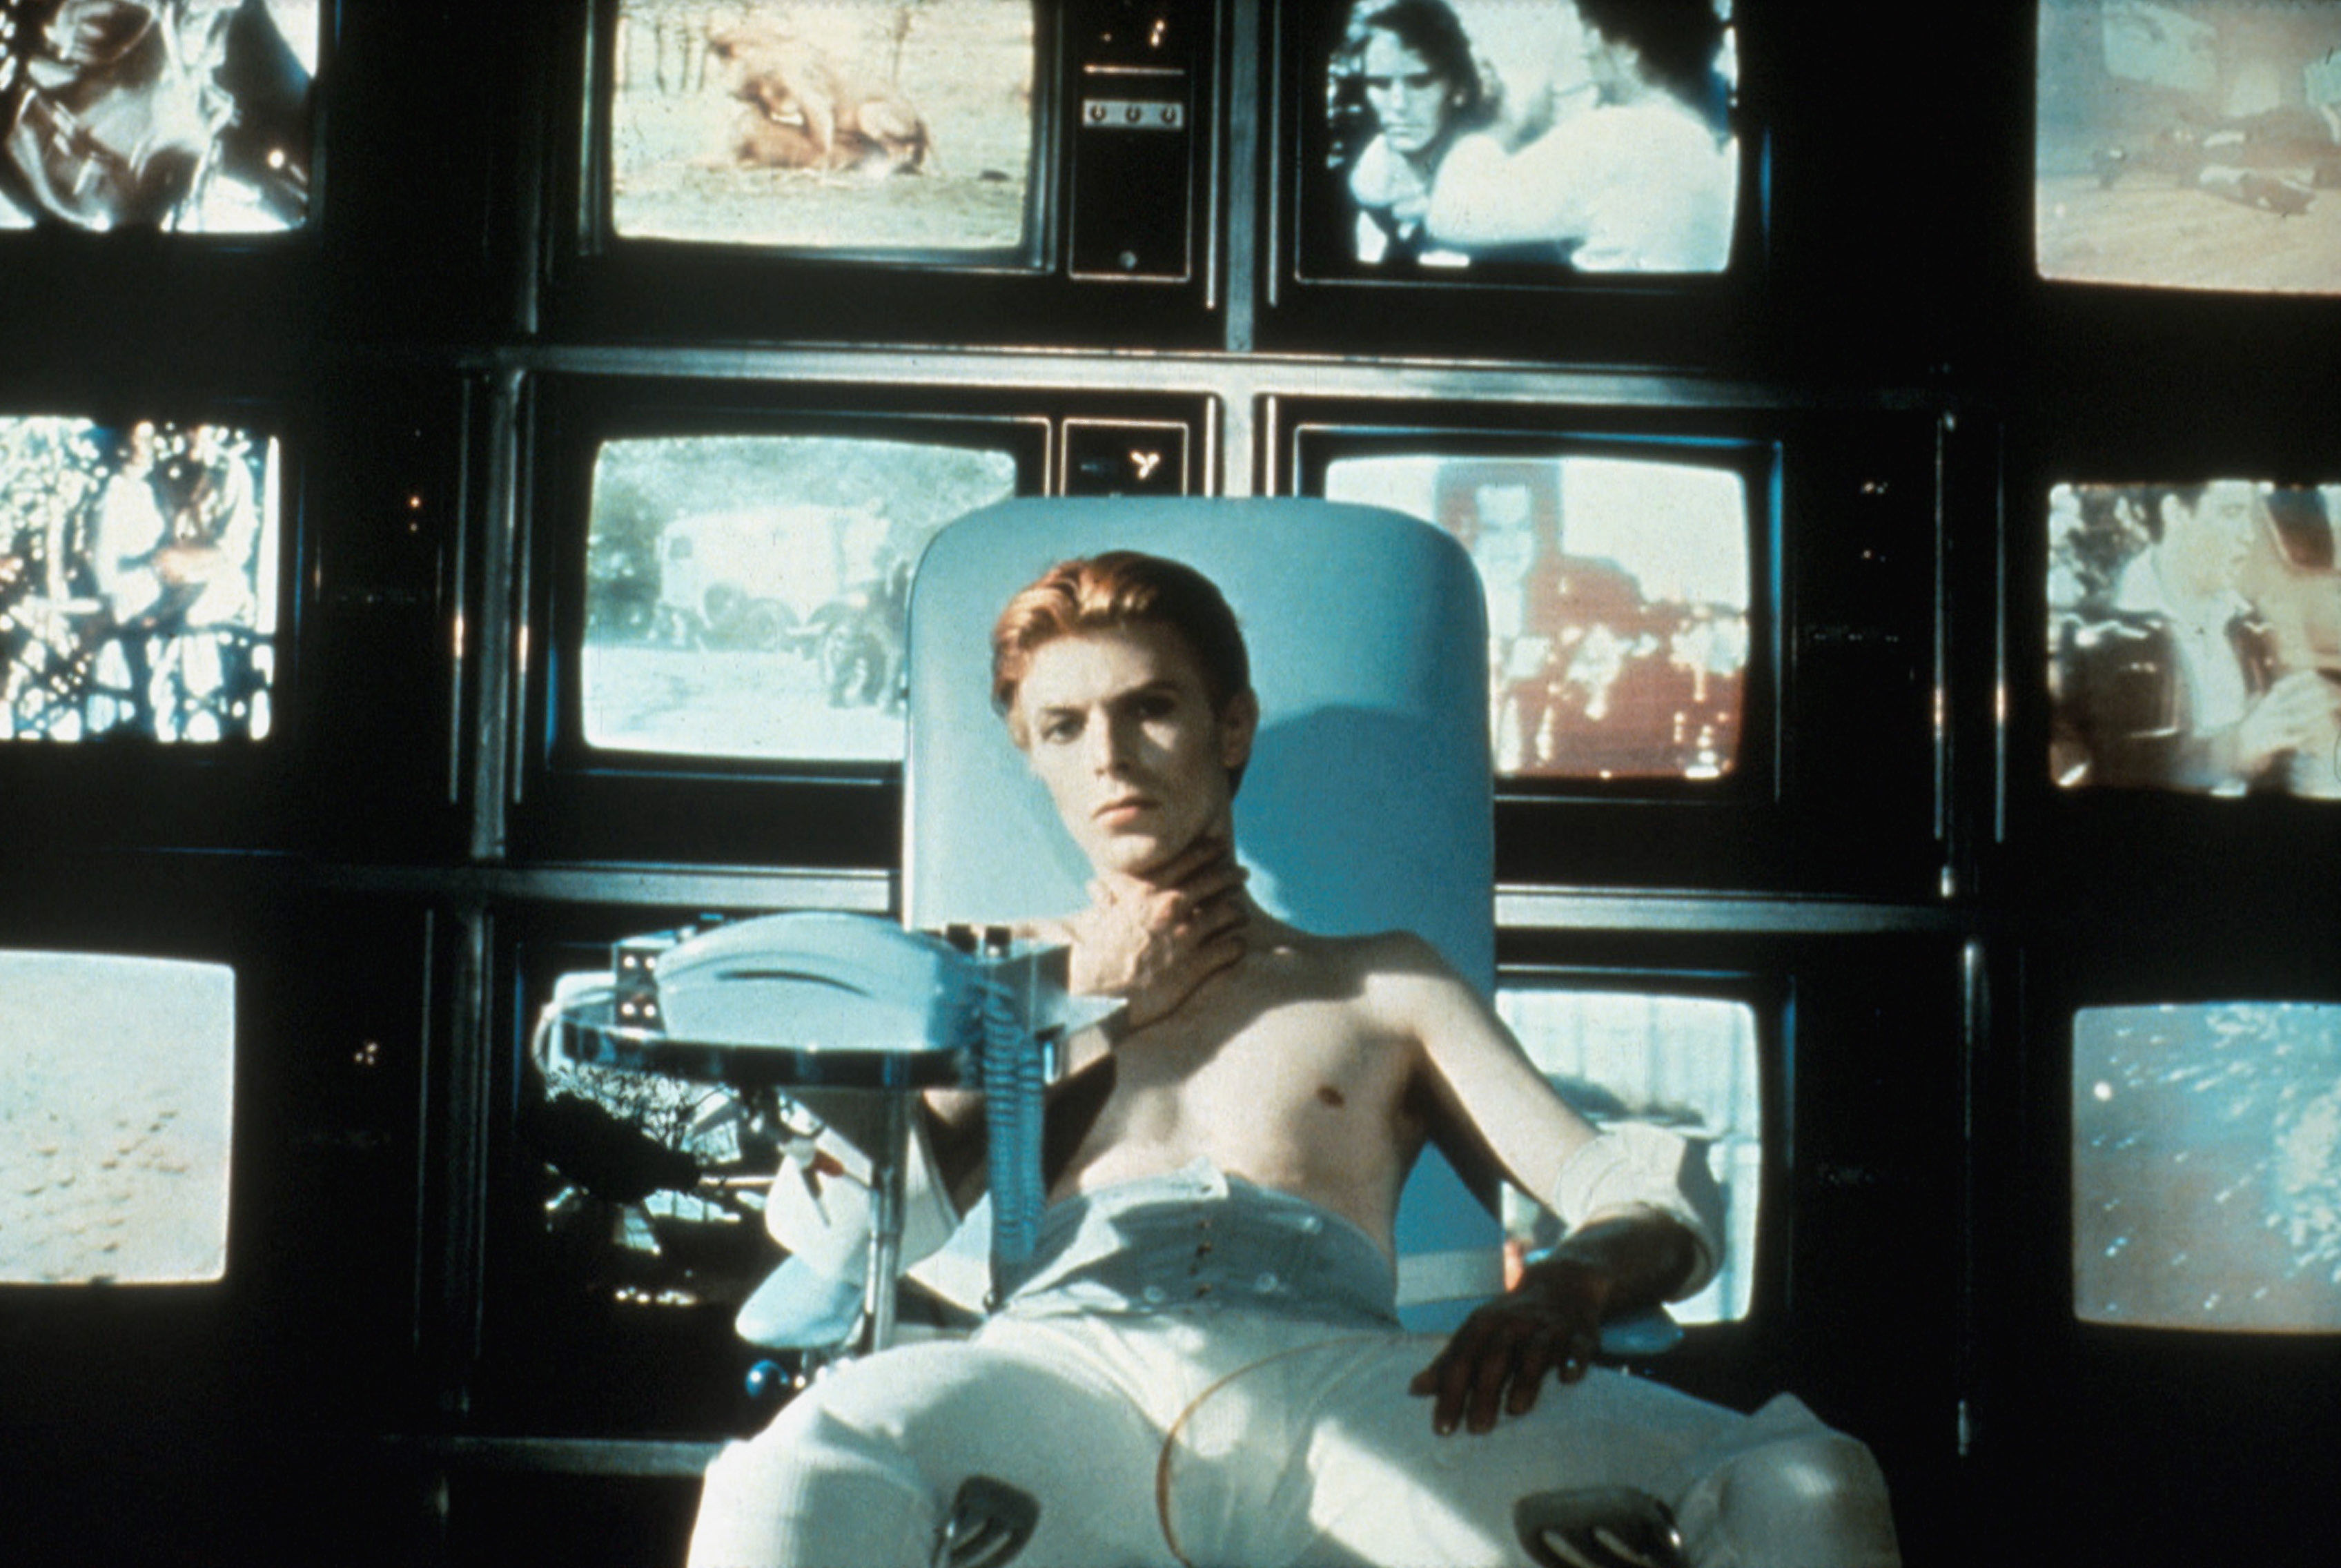 Cinemadope: Starman – the undeniable talents of David Bowie